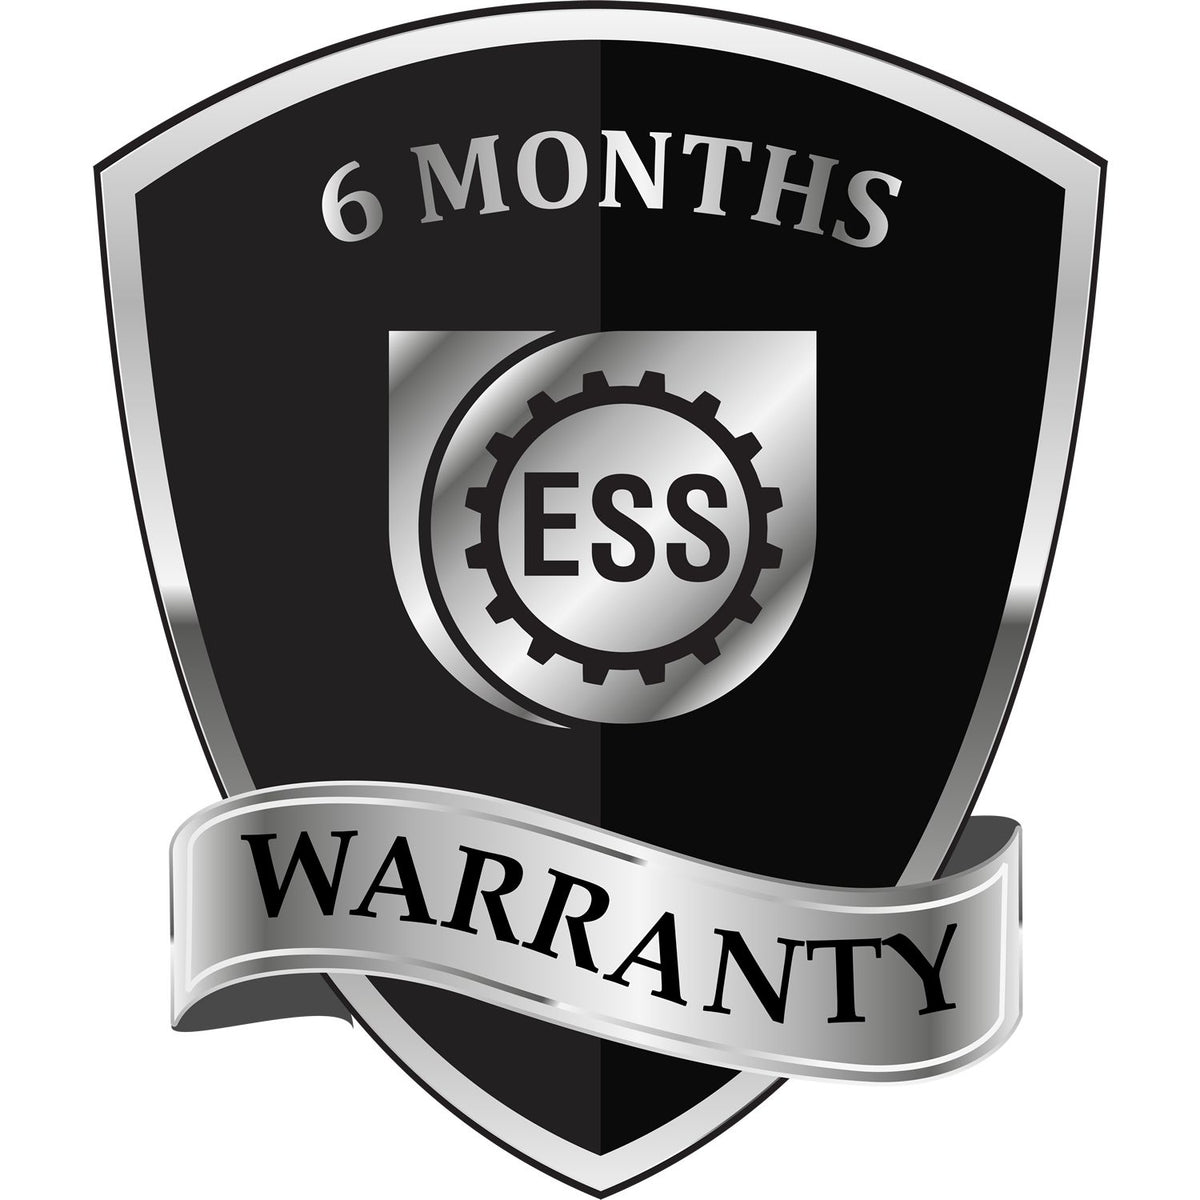 A badge or emblem showing a warranty icon for the Slim Pre-Inked Ohio Professional Engineer Seal Stamp